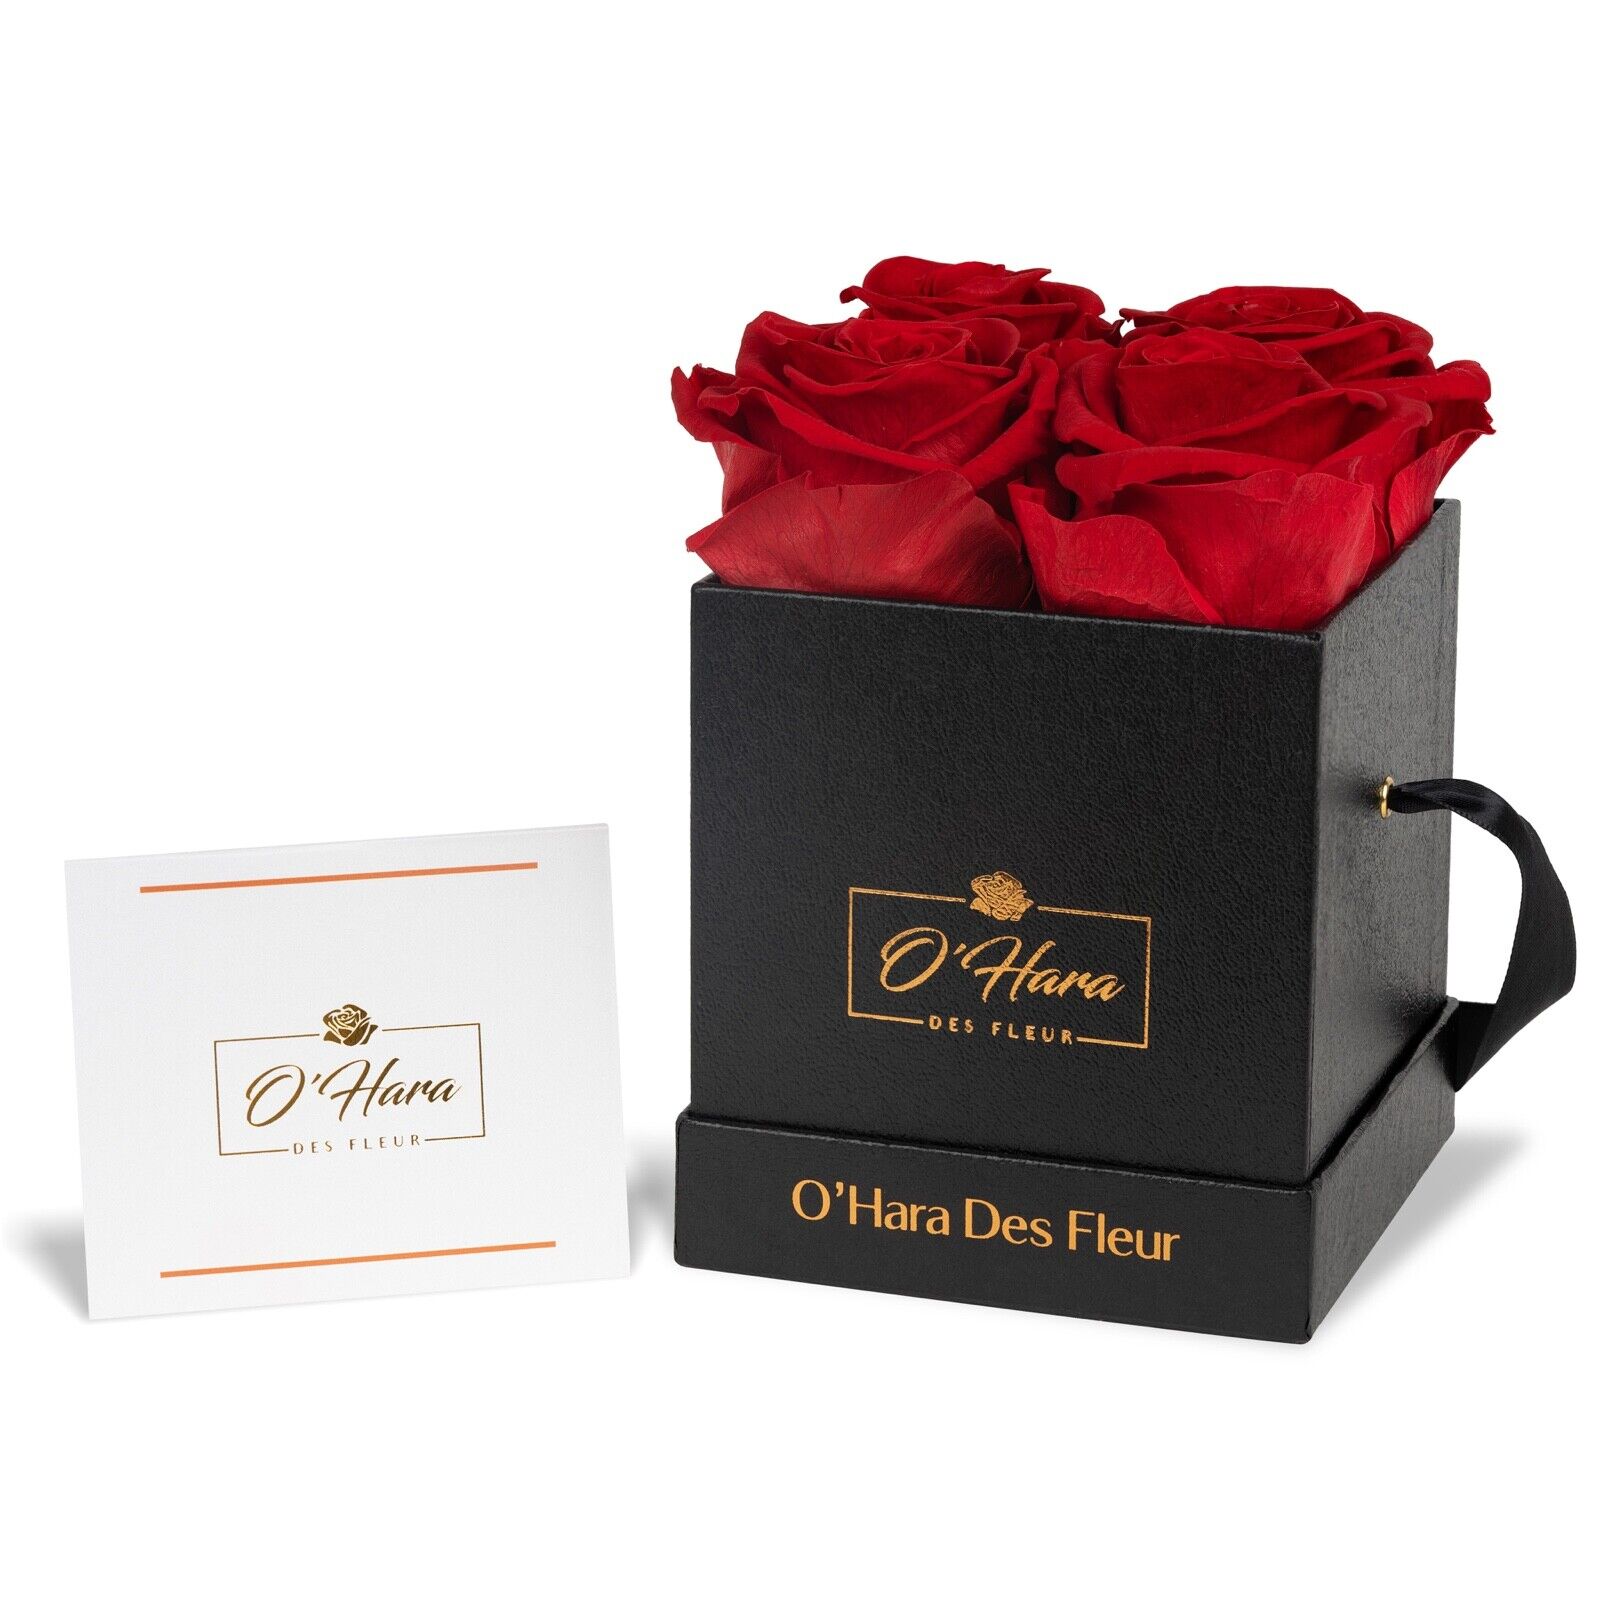 Preserved  Real Roses| Roses that last 1 year o more| Roses in a Box. O'Hara des Fleur - фотография #3